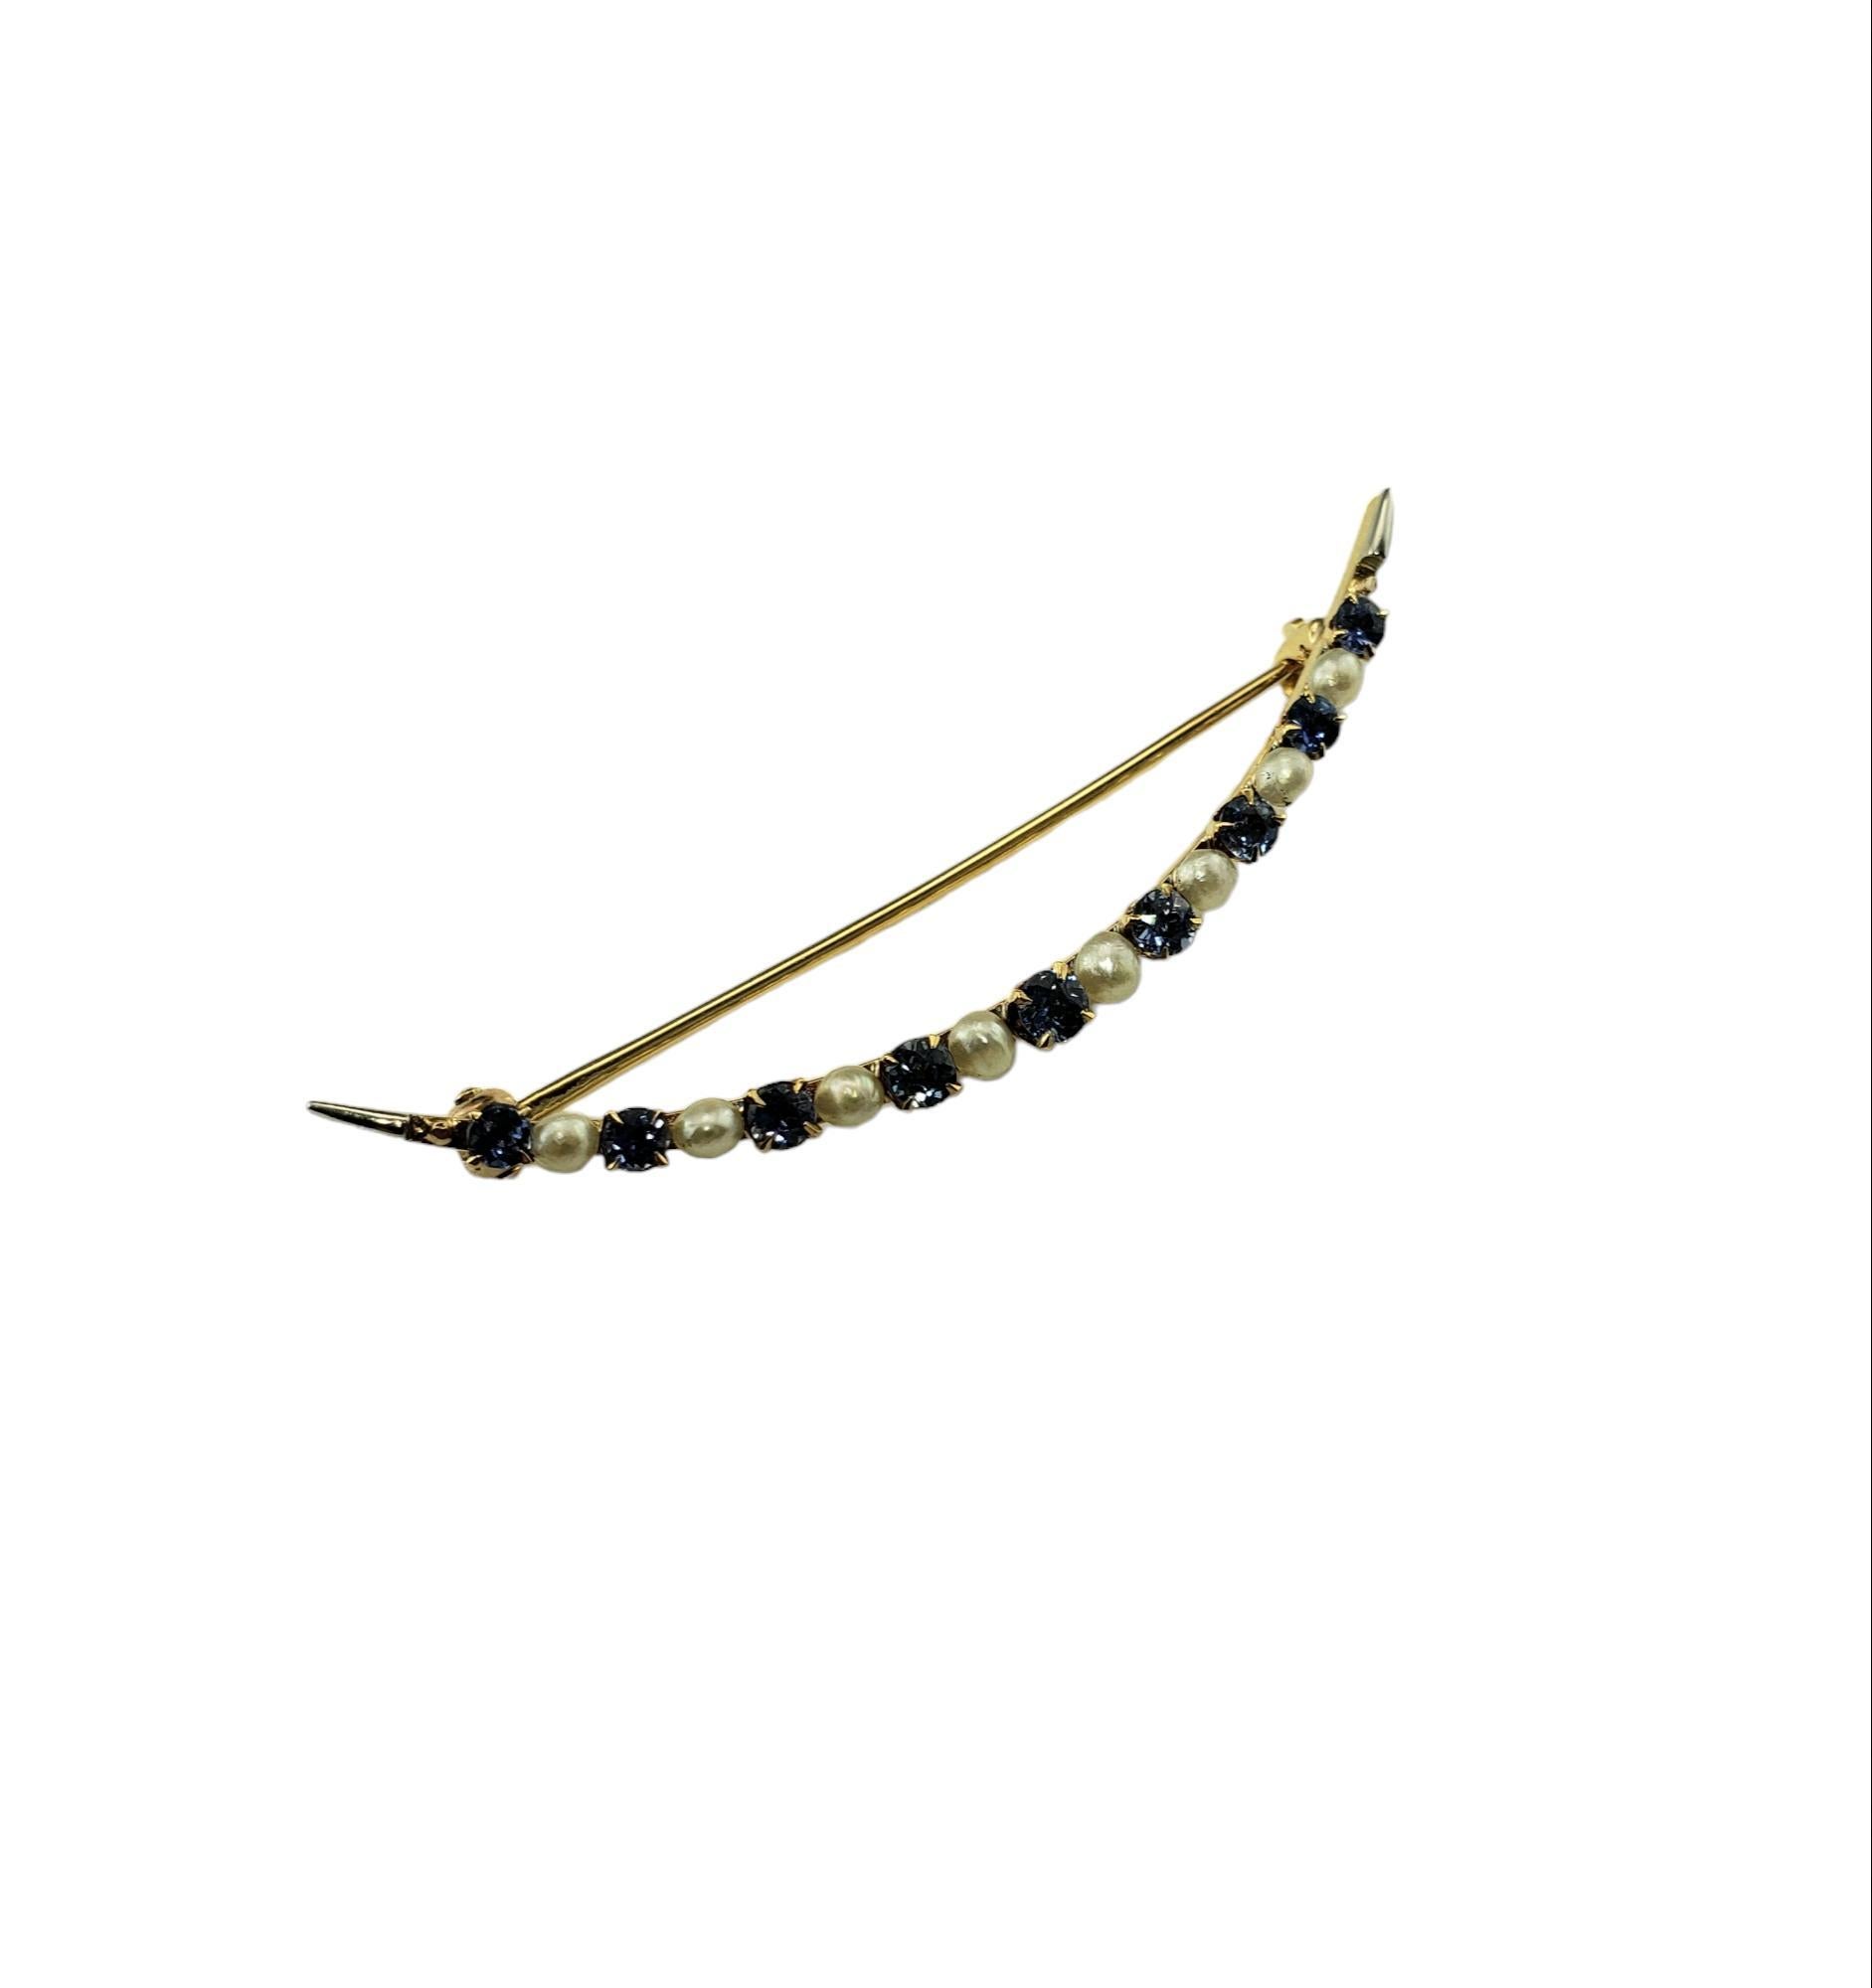 Vintage 14K Yellow Gold Sapphire and Seed Pearl Pin JAGi Certified-

This elegant pin features nine round blue sapphires and eight seed pearls set in beautifully detailed 14K yellow gold.  

Total sapphire weight: 1.26 ct.

Size: 2.1 in. 

Stamped: